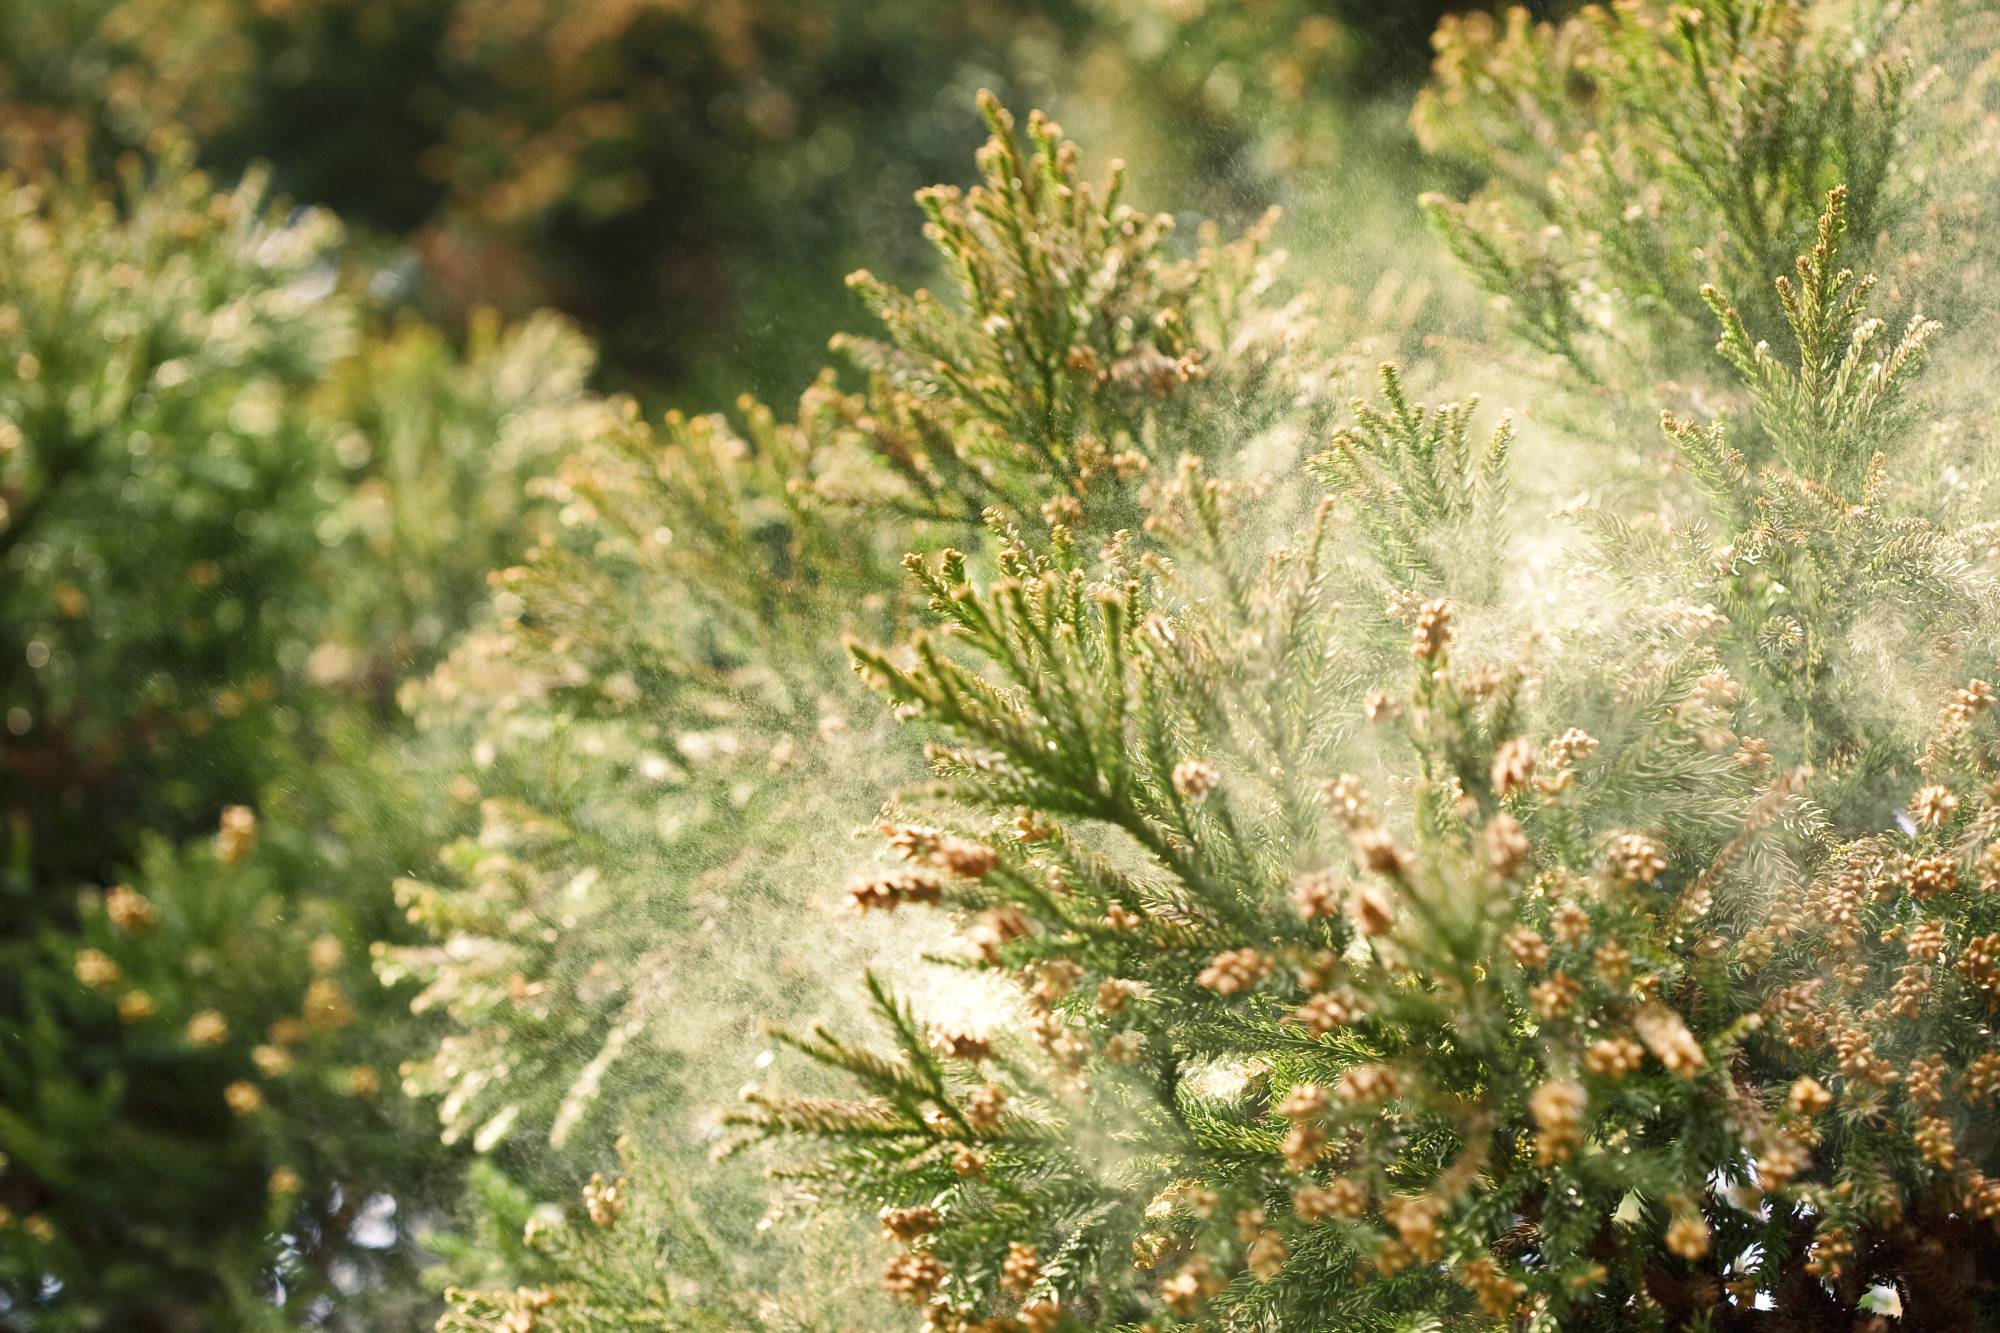 This year is forecast to see up to twice as much pollen over an average year. | GETTY IMAGES